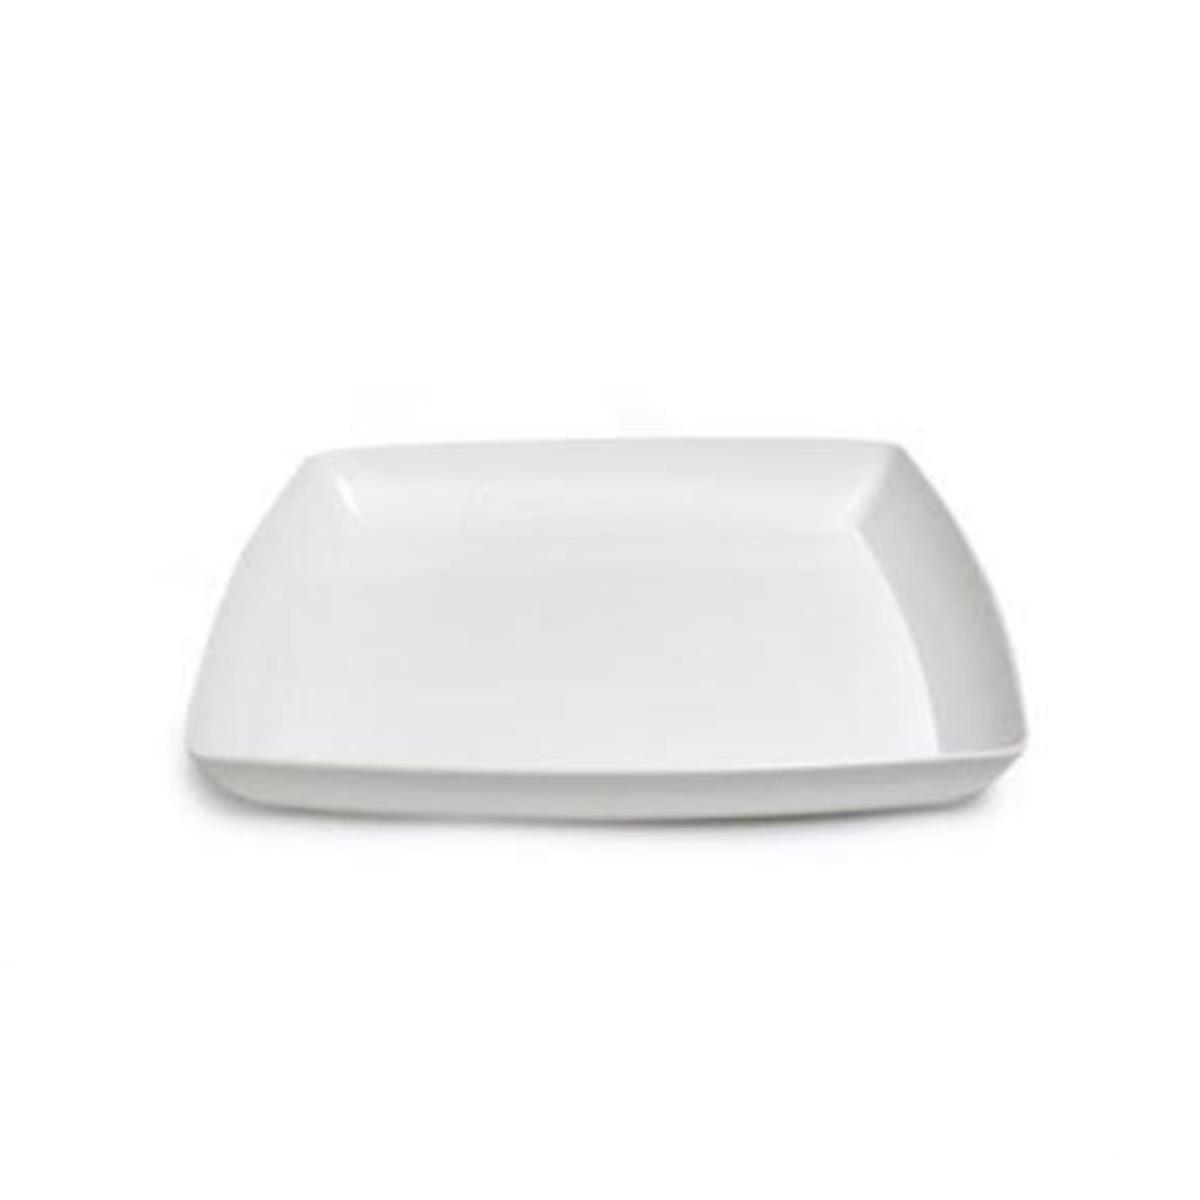 Sq12120 Pe 12 In. White Simply Squared Tray - Case Of 12